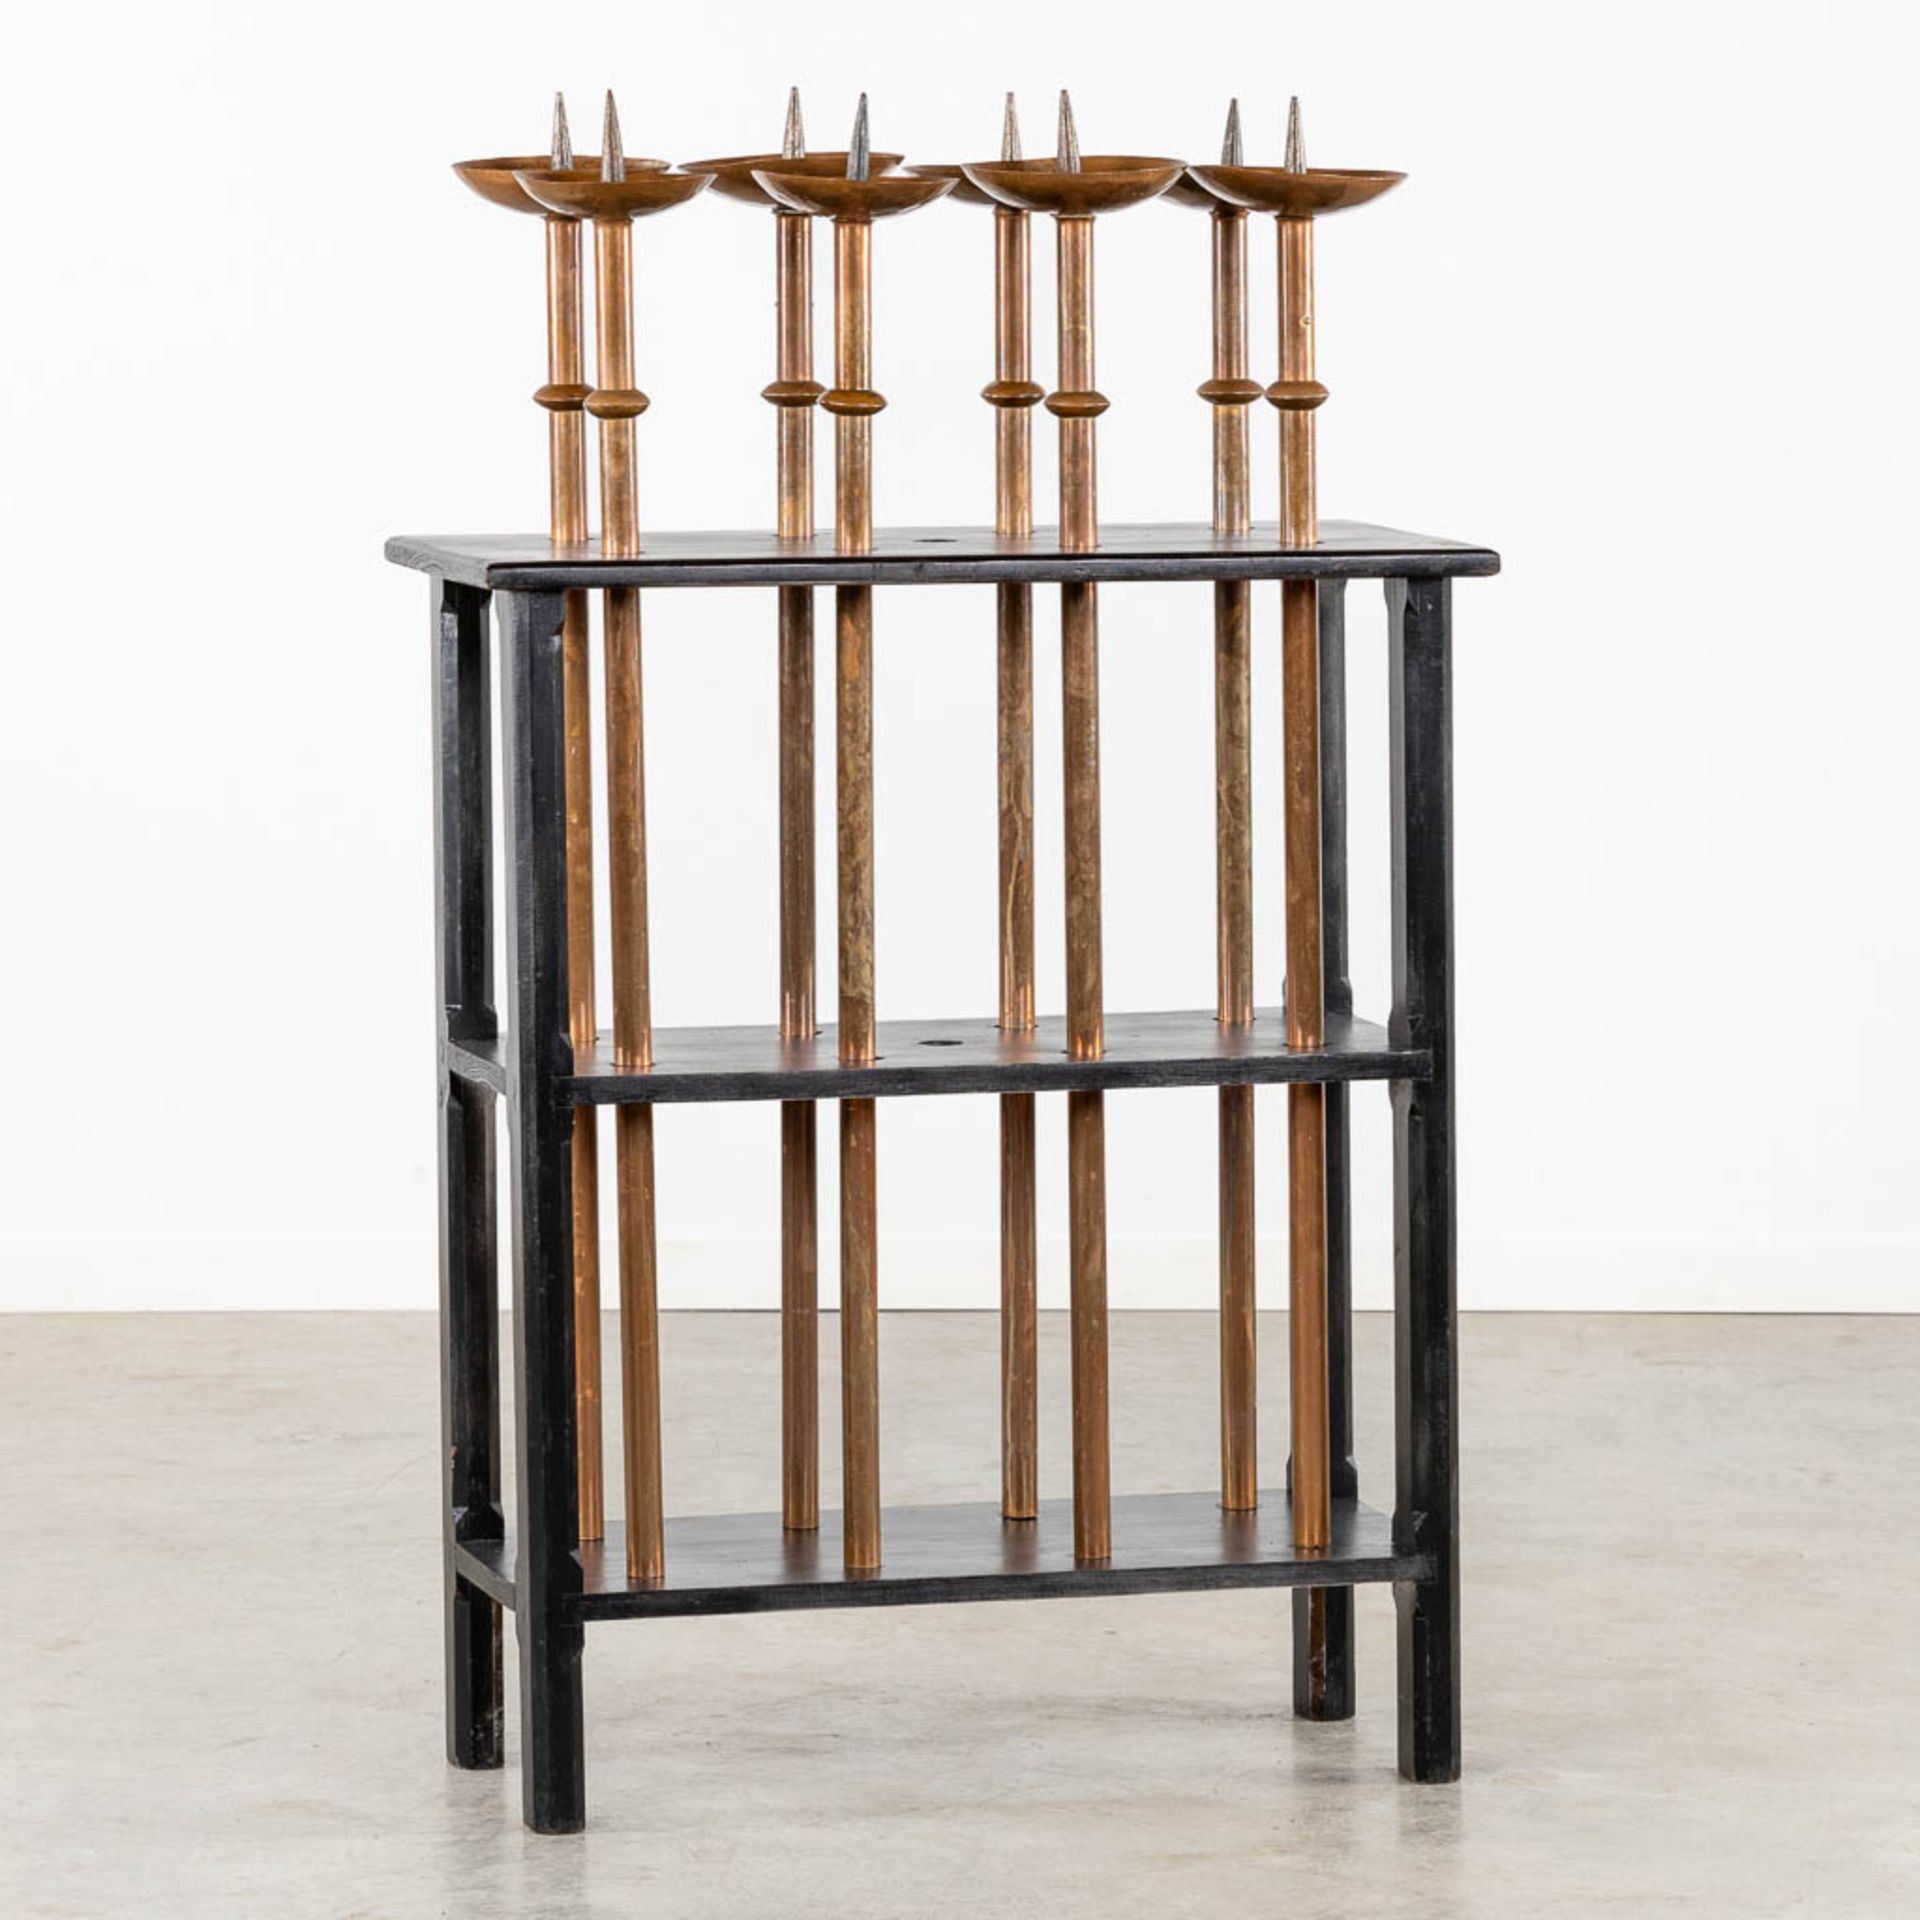 A set of 8 processional candelabra in a wood stand. (L:36 x W:75 x H:124 cm)